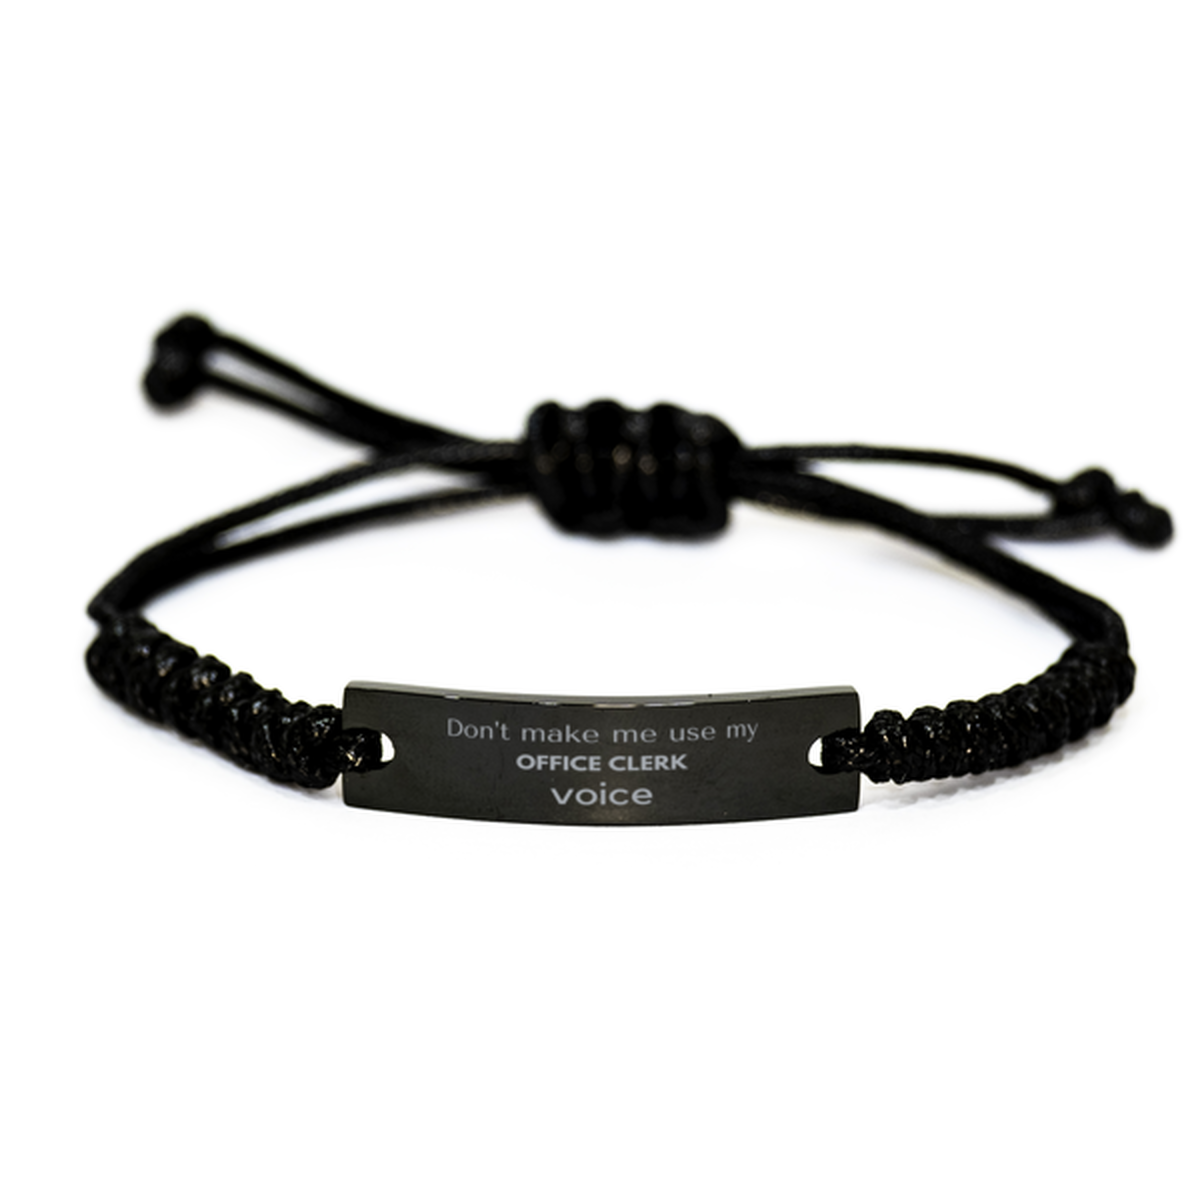 Don't make me use my Office Clerk voice, Sarcasm Office Clerk Gifts, Christmas Office Clerk Black Rope Bracelet Birthday Unique Gifts For Office Clerk Coworkers, Men, Women, Colleague, Friends